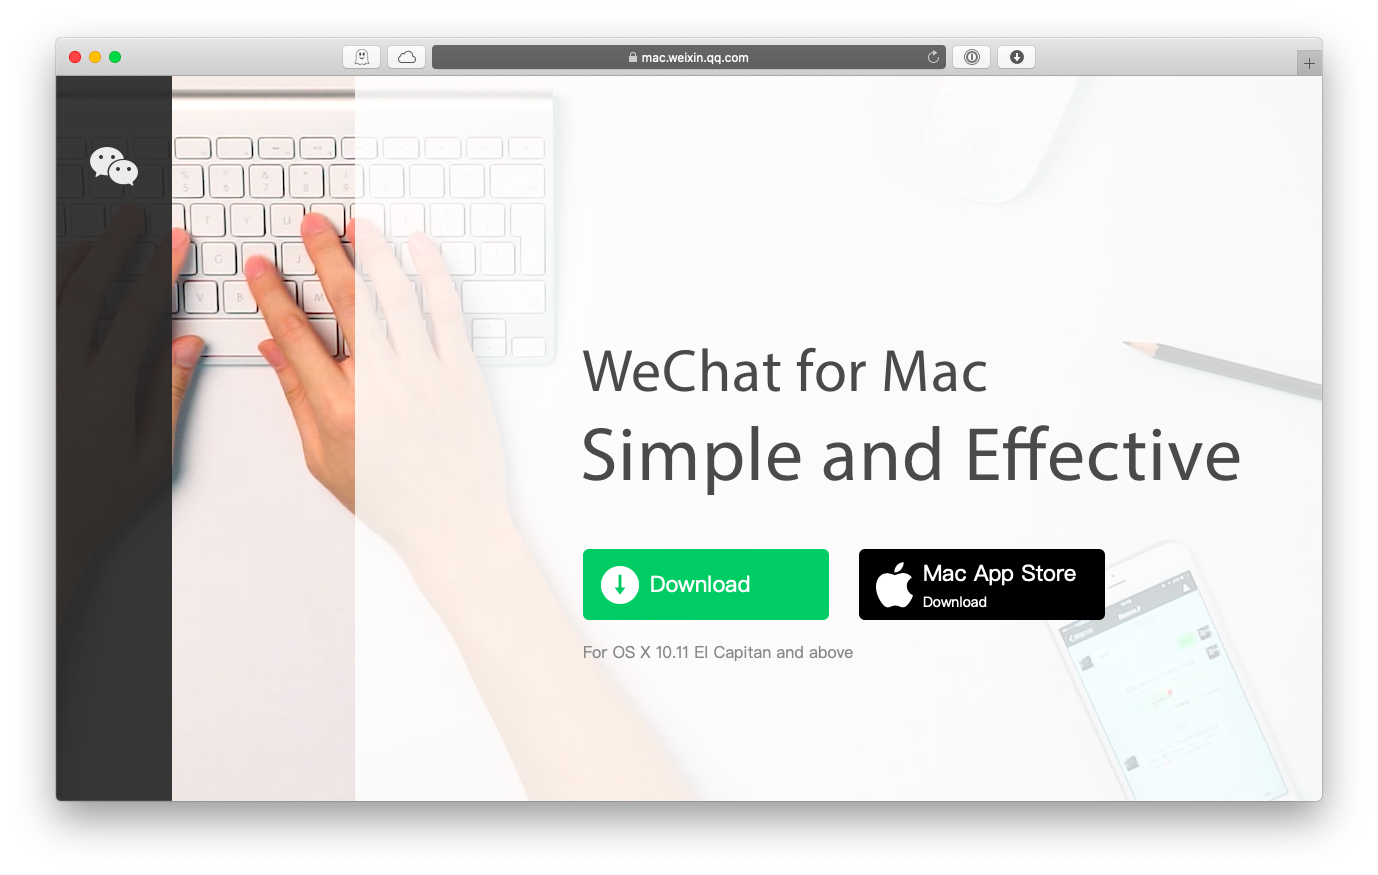 wechat for mac os 10.6